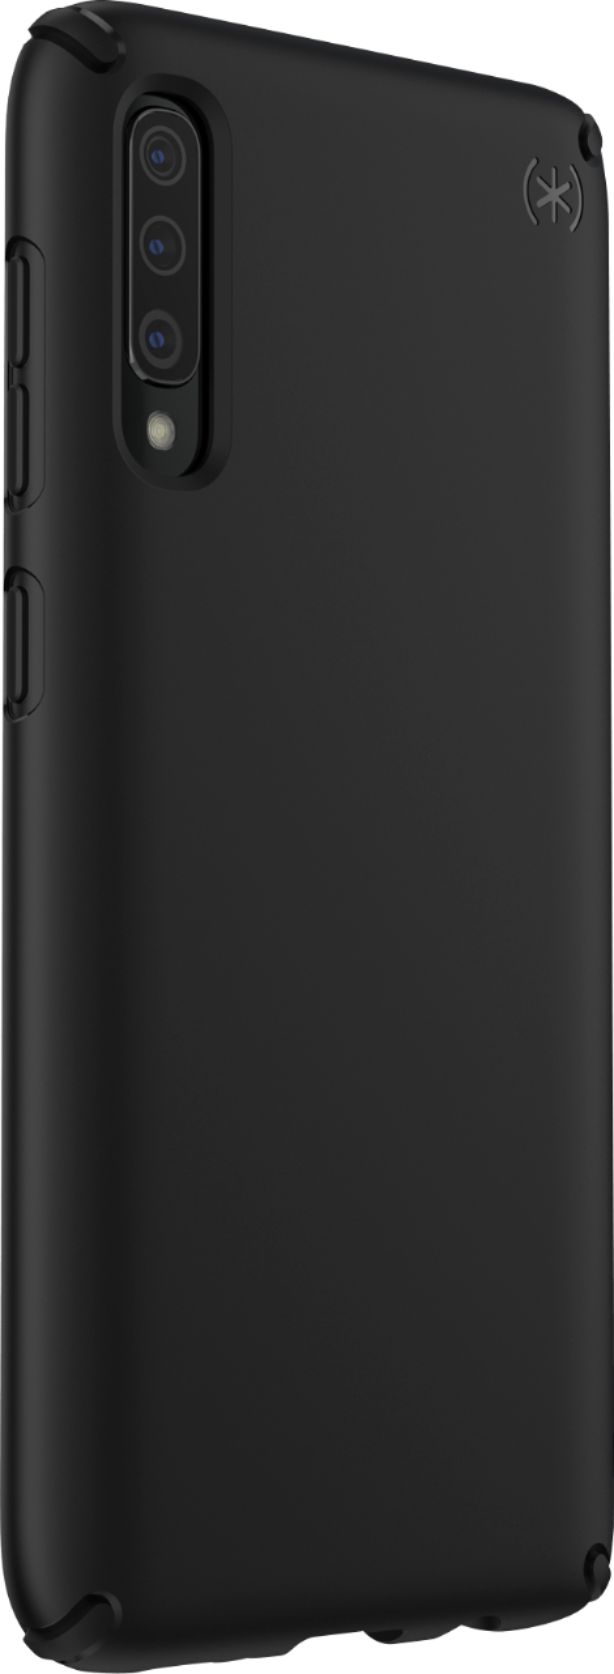 Angle View: Rugged Protective Cover for Samsung Galaxy Note10+ and Note10+ 5G - Black